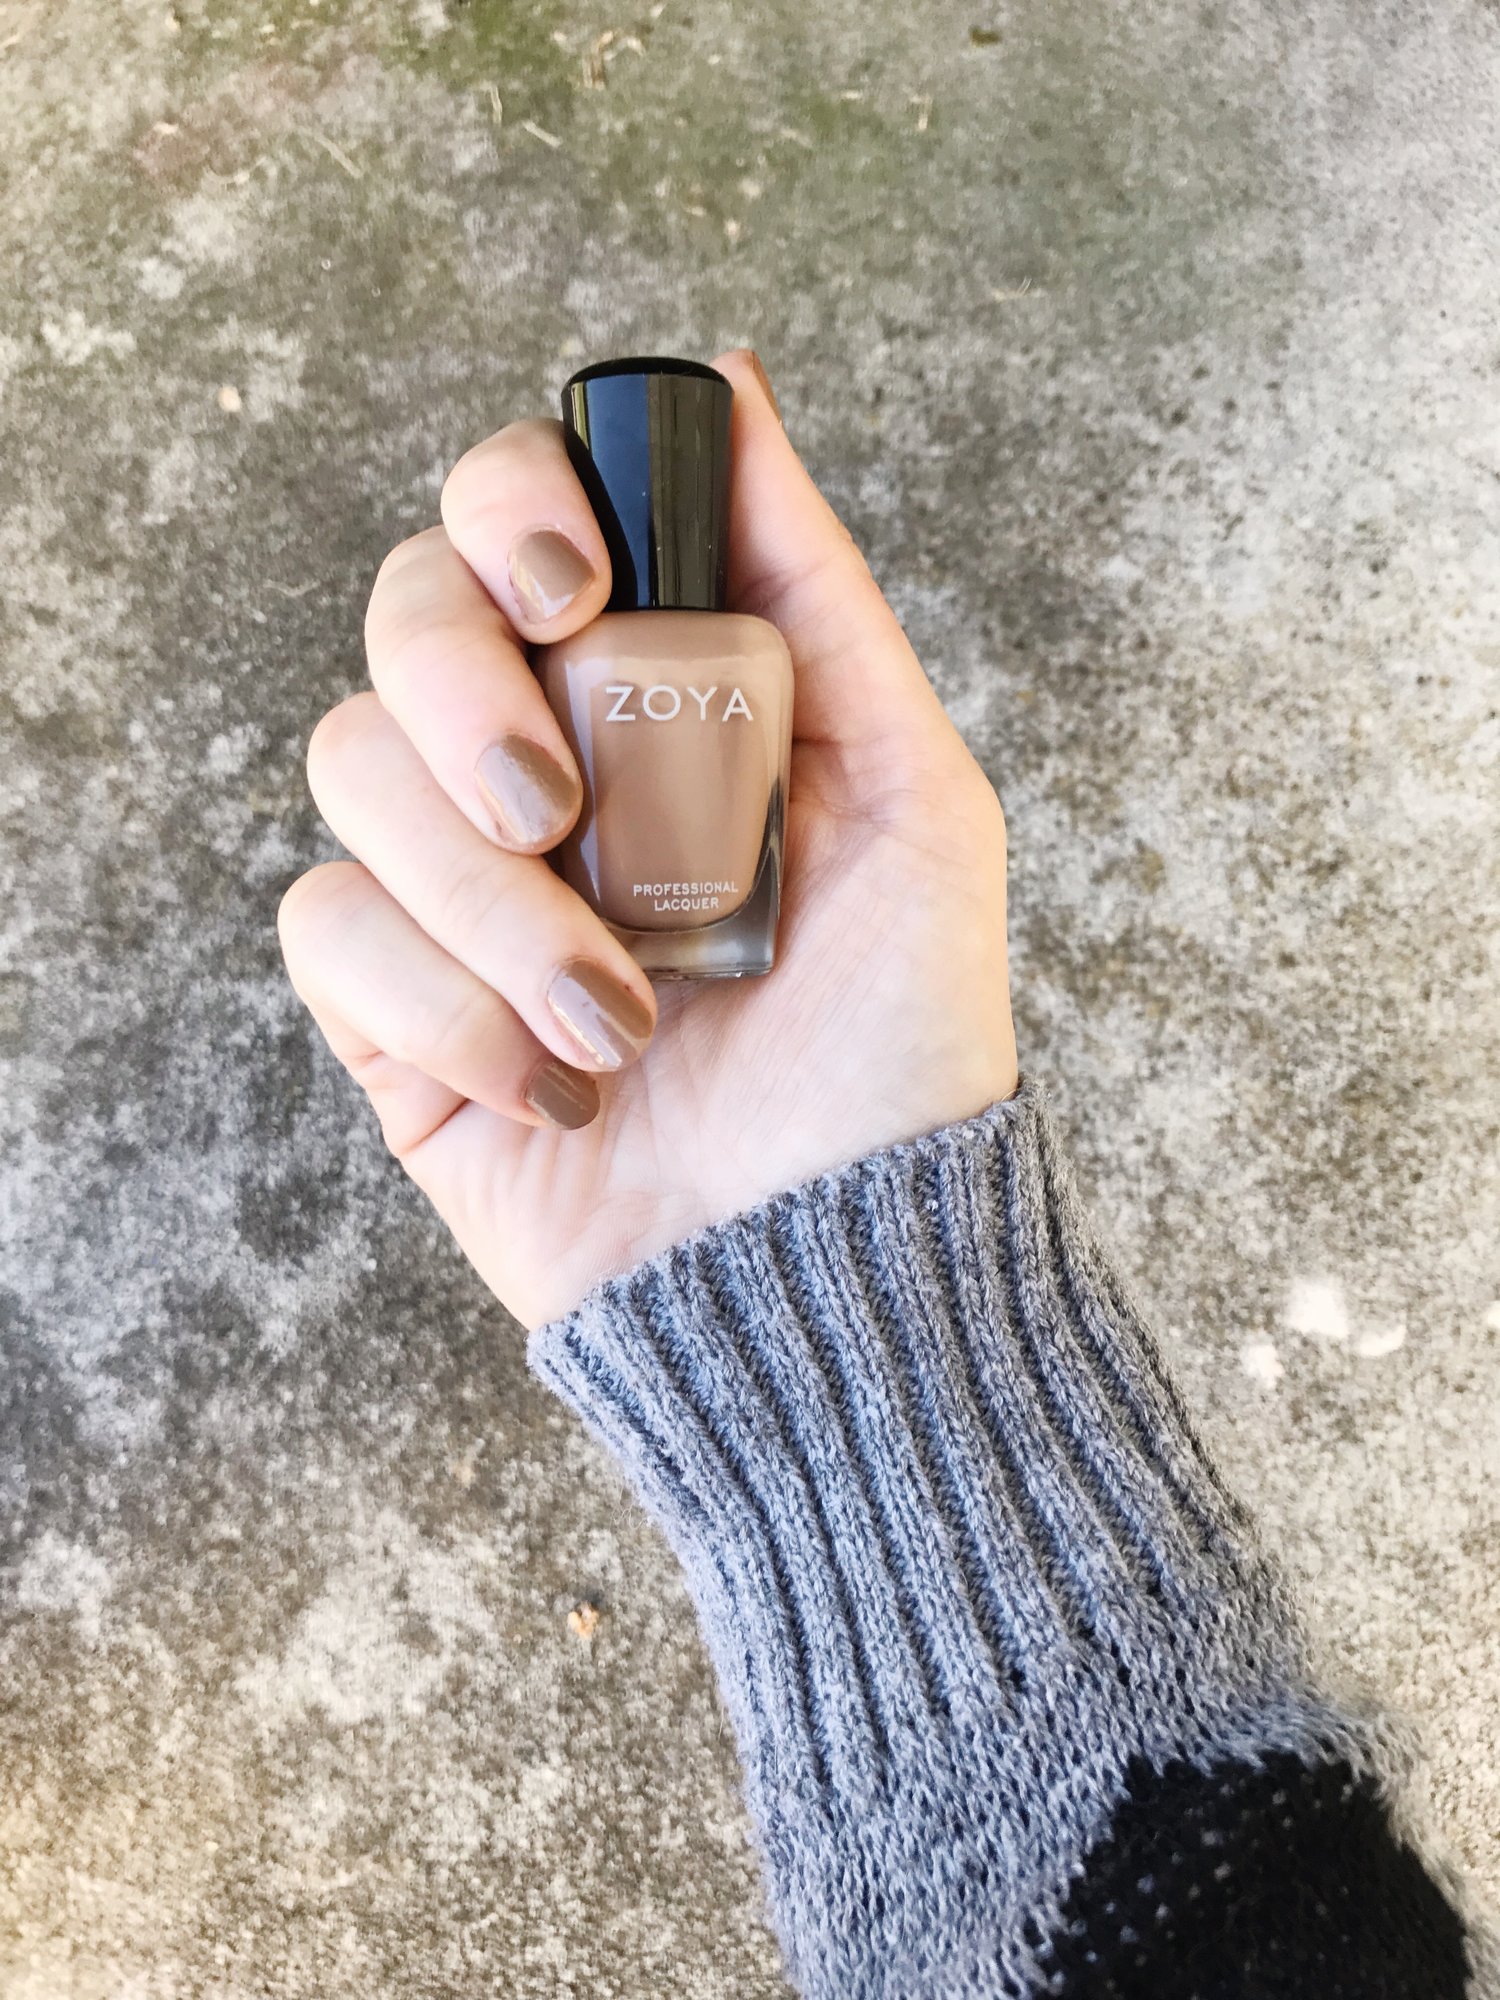 Top 10 Favorite Fall Nail Polishes from Zoya 10 Free. — MALLORIE OWENS